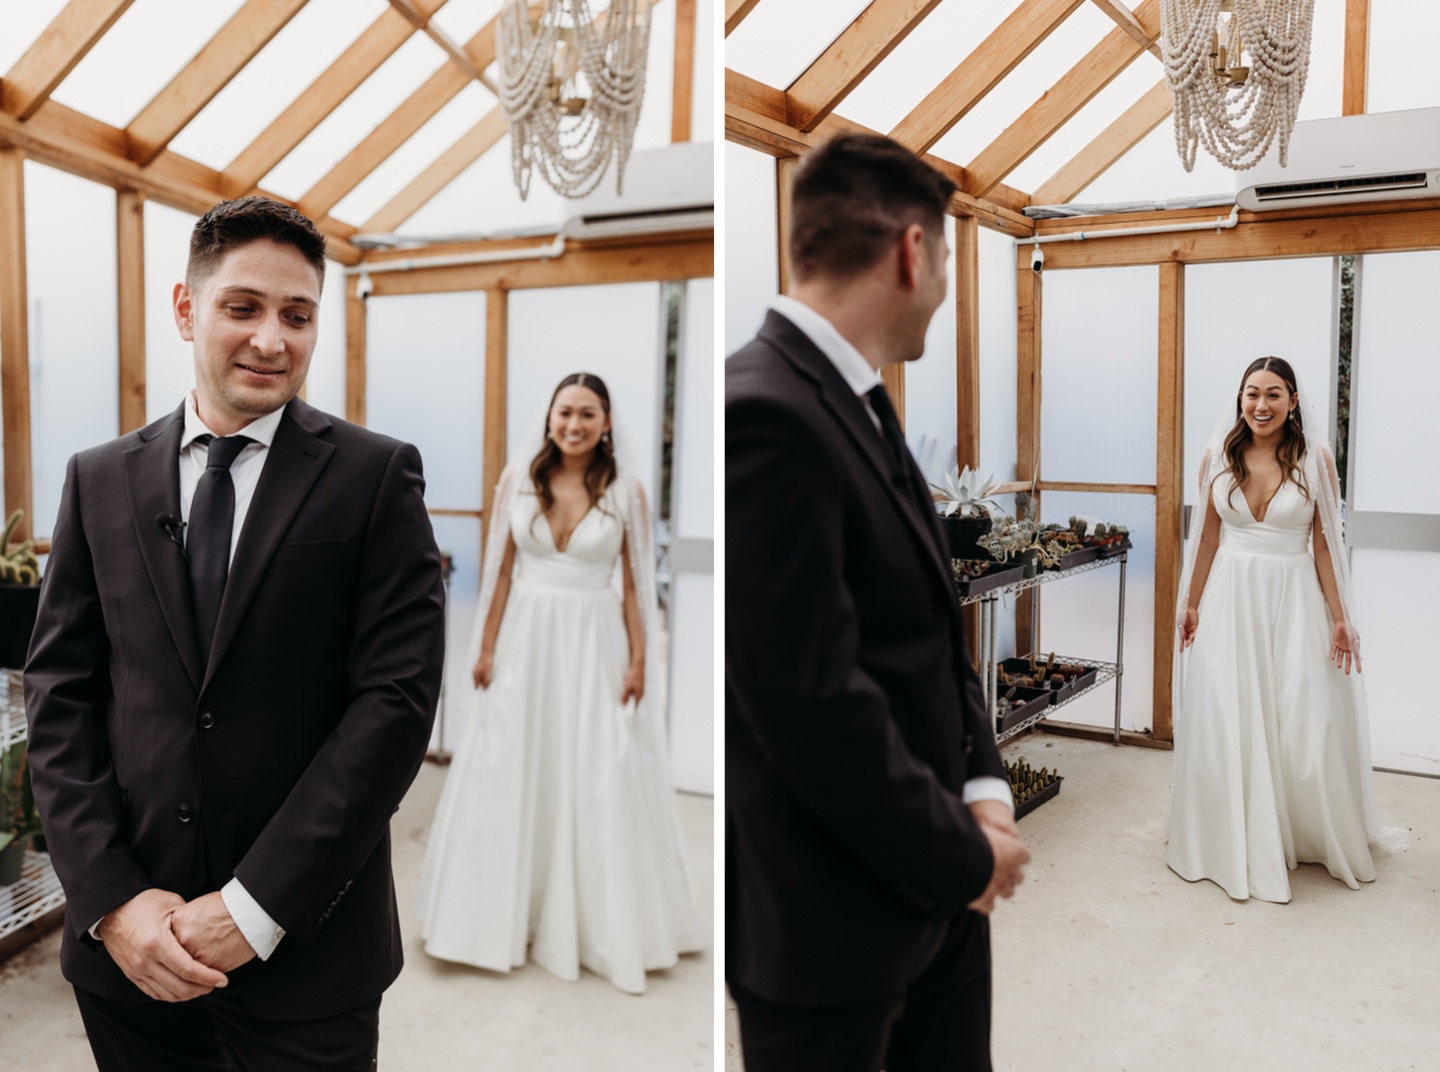 Bride walks up to her groom for an intimate first look before their Prickly Pear wedding.